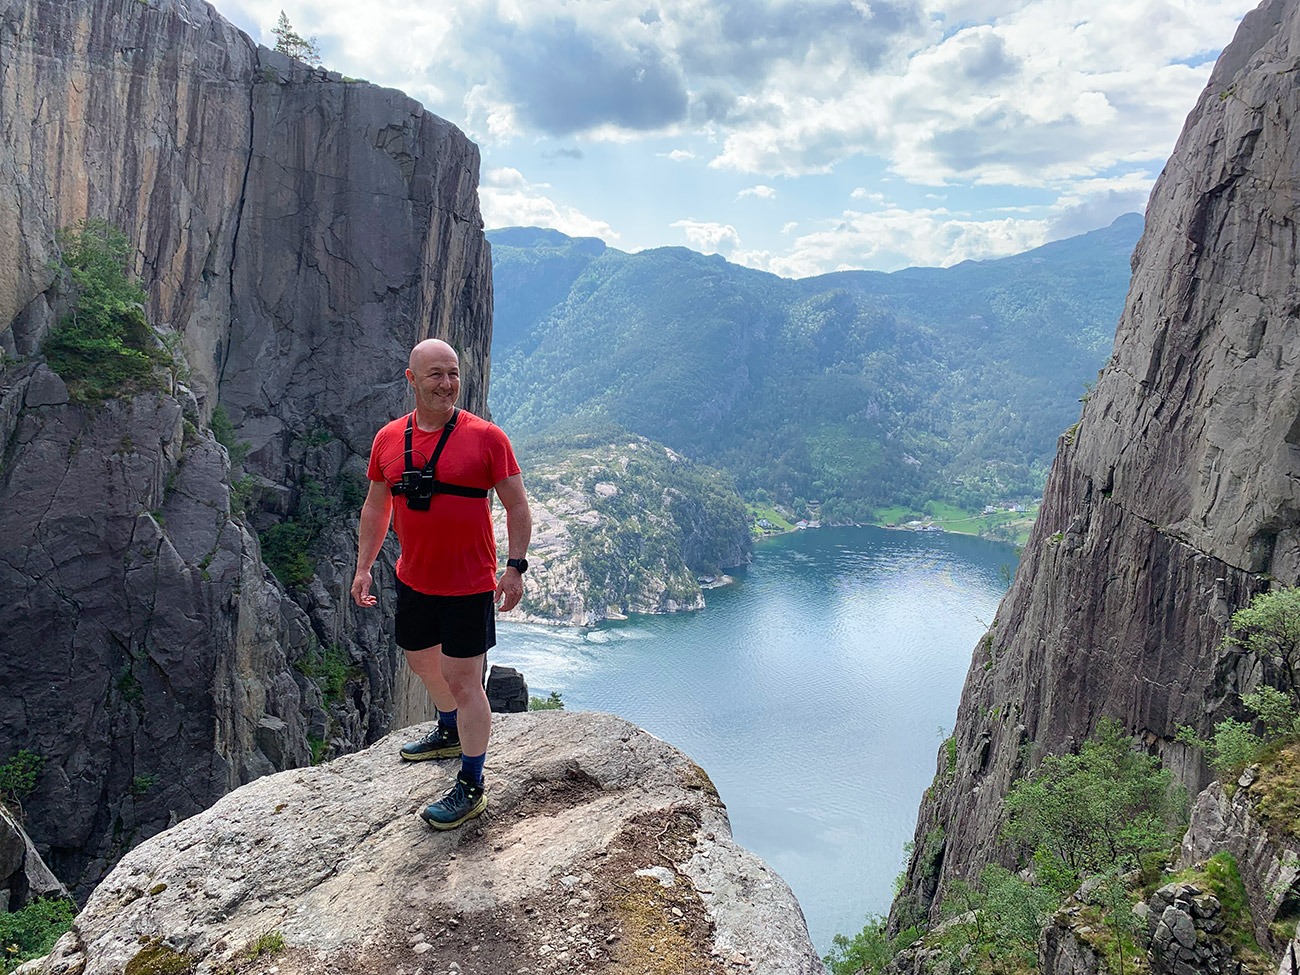 Fantapytten, Hike to Fantapytten from Høllesliheia &#8211; Lysefjord&#8217;s Infinity Pool. Return hike along several mountain cliffs and gorges with panoramic view-points., Welsh Man Walking